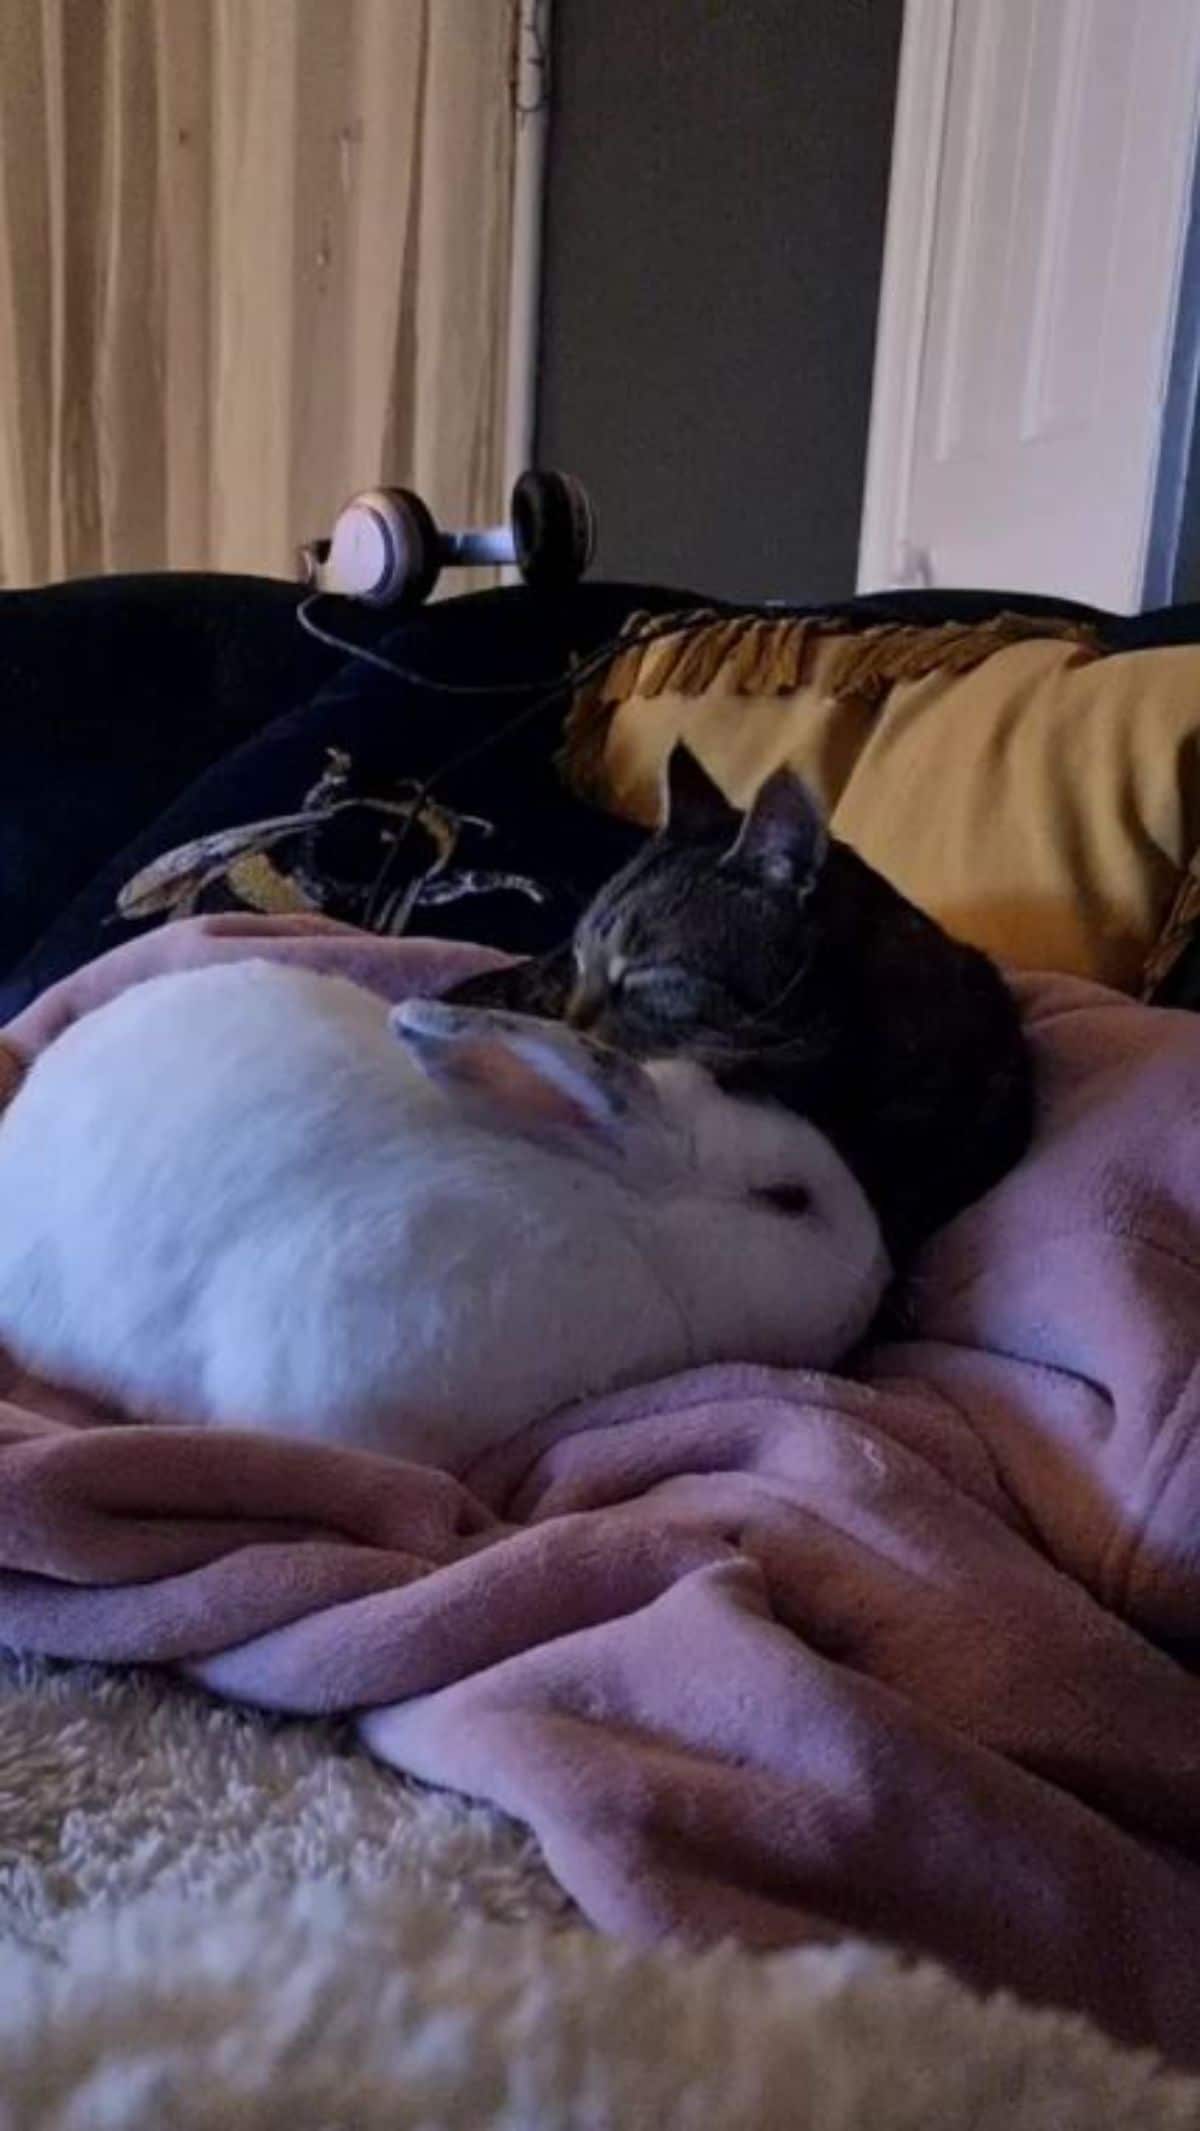 grey tabby cat grooming a white rabbit on a bed